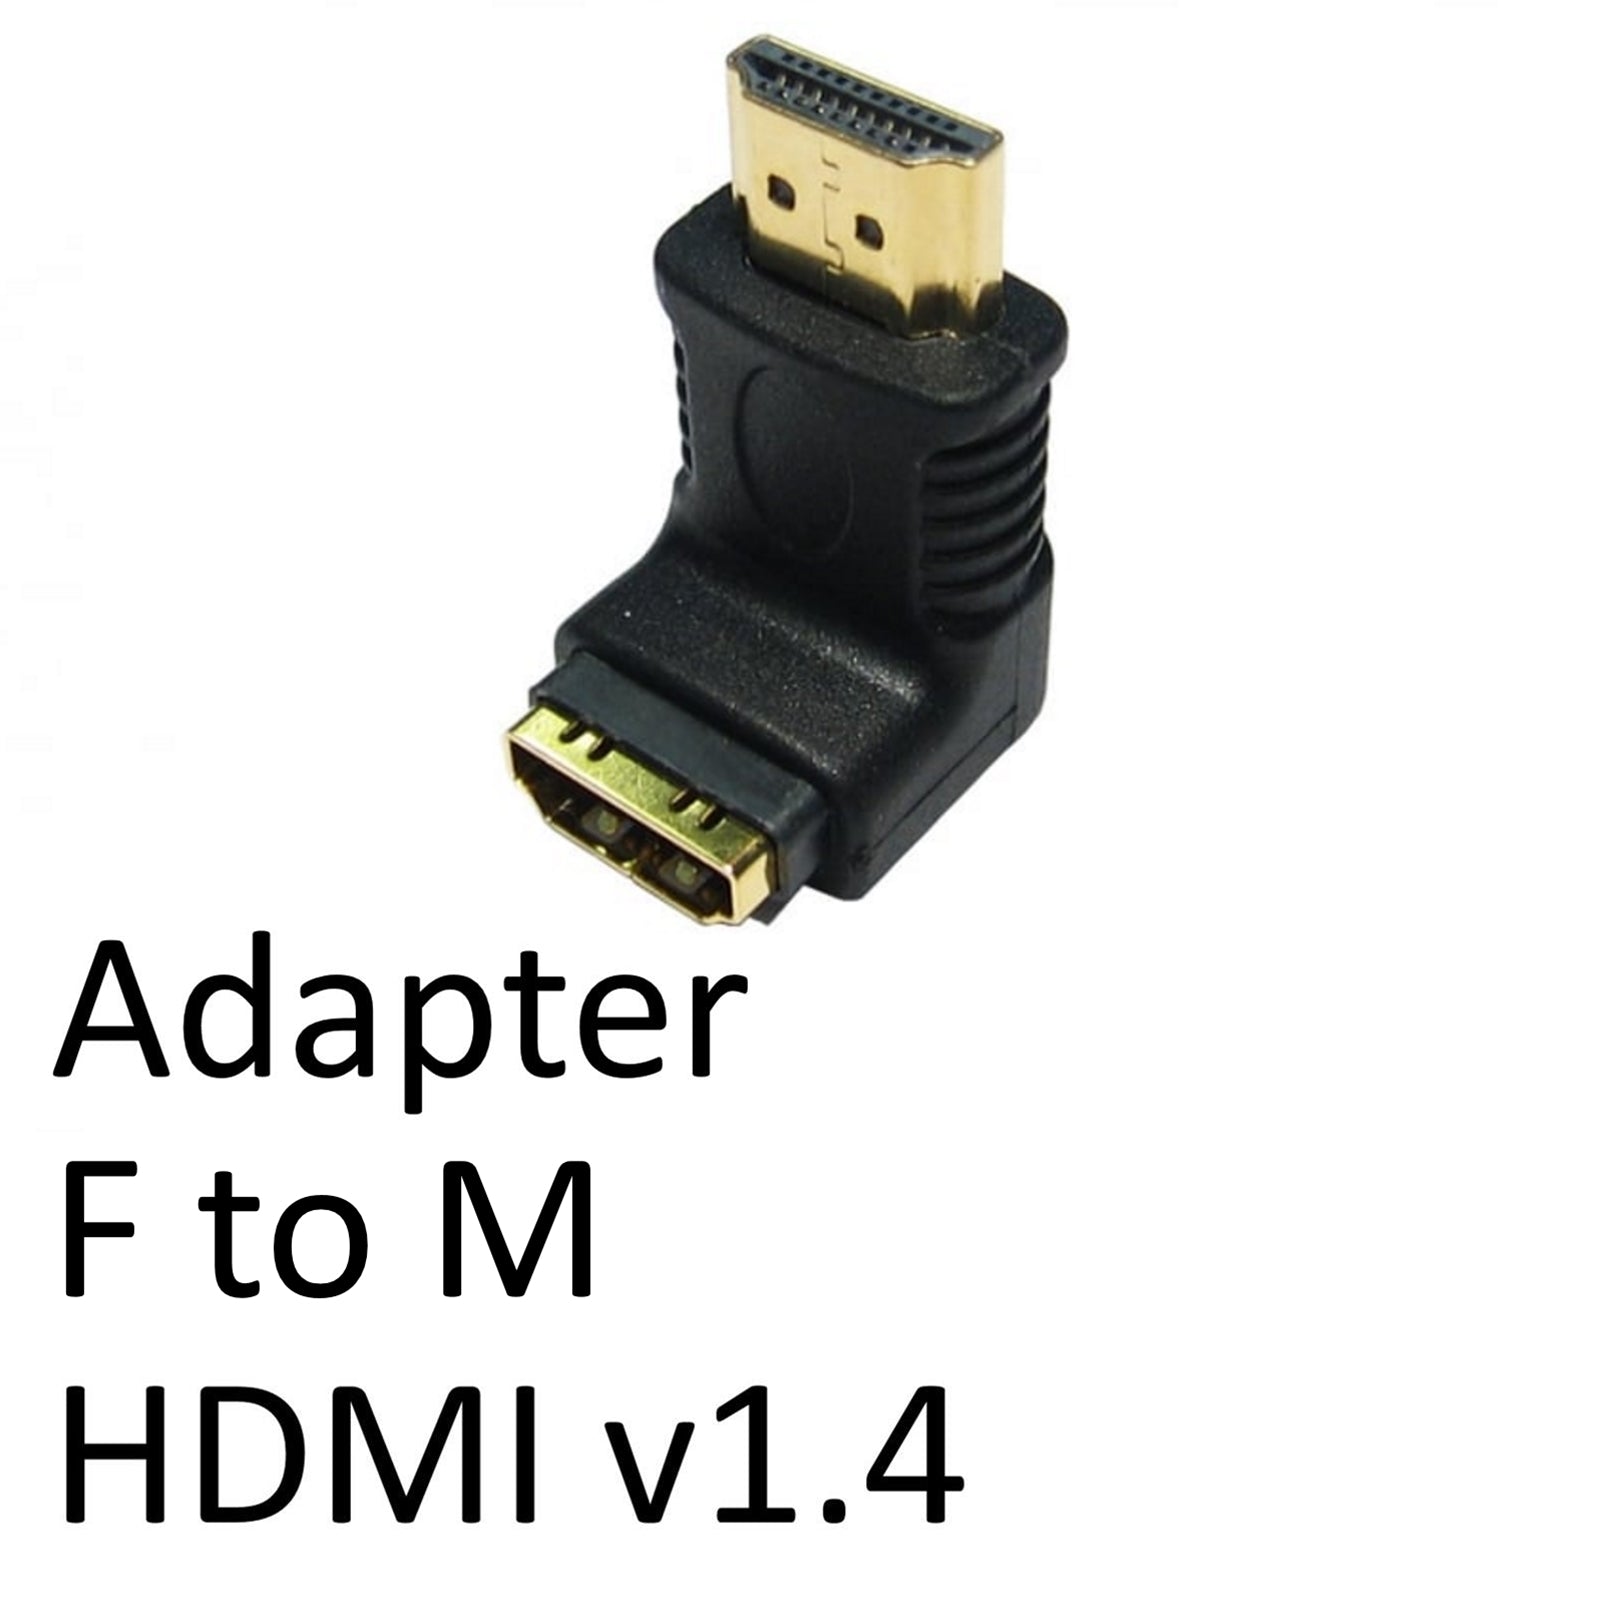 Photos - Cable (video, audio, USB) Target HDMI 1.4 (F) to HDMI 1.4 (M) Black OEM Right Angled Adapter CLTAR-H 